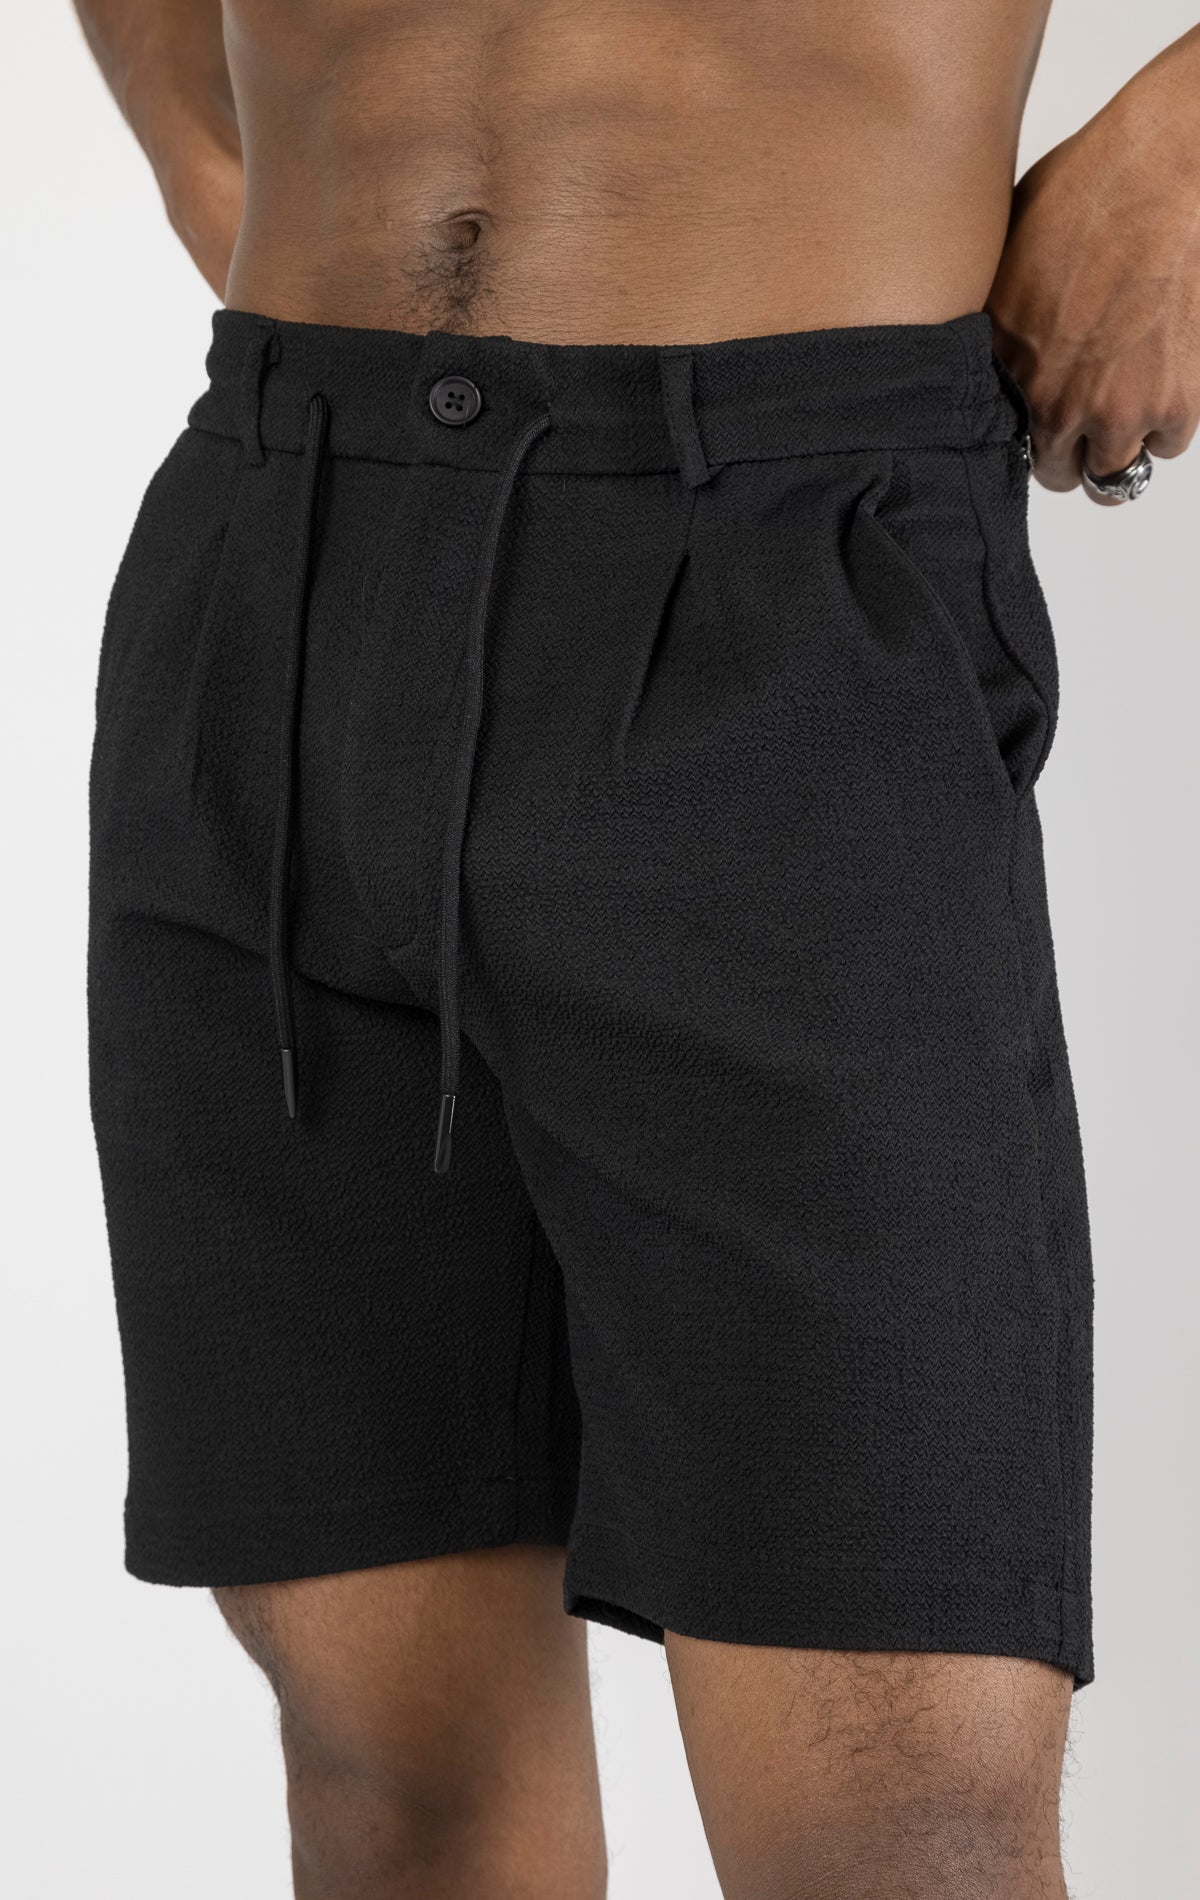 Men's elegant everyday shorts in black. The shorts are made from a blend of polyester (74%), viscose (24%), and elastane (2%) and feature a tailored fit and a versatile length.